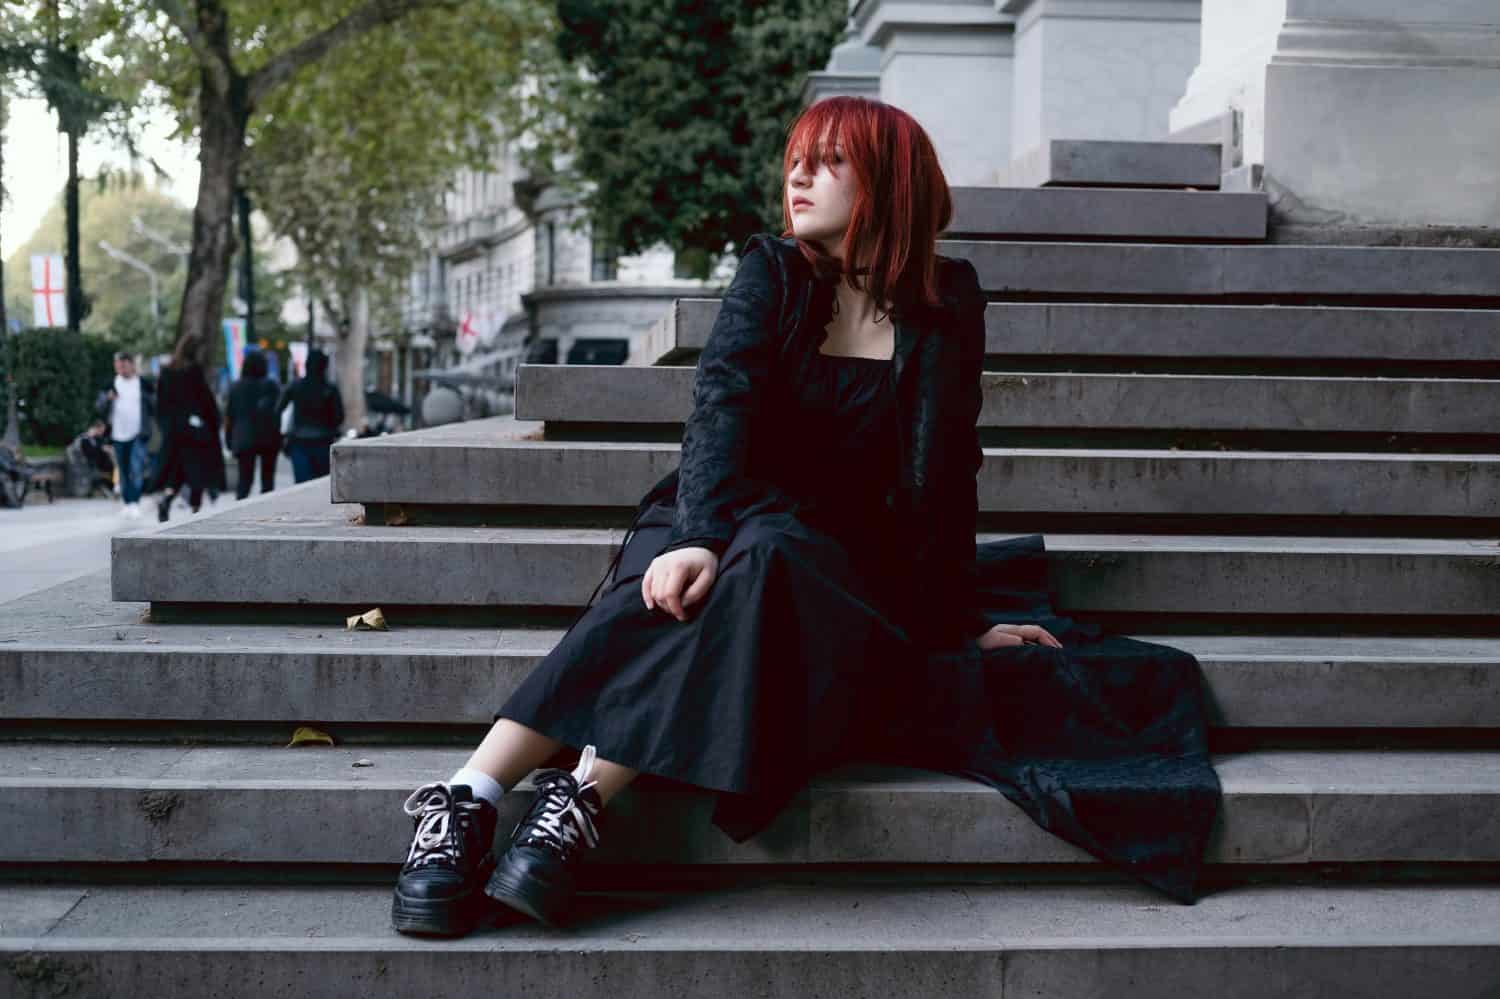 Young woman dressed gothic style in long black dress and cloak wearing red hair sitting alone outdoors in city on the steps of medieval European building